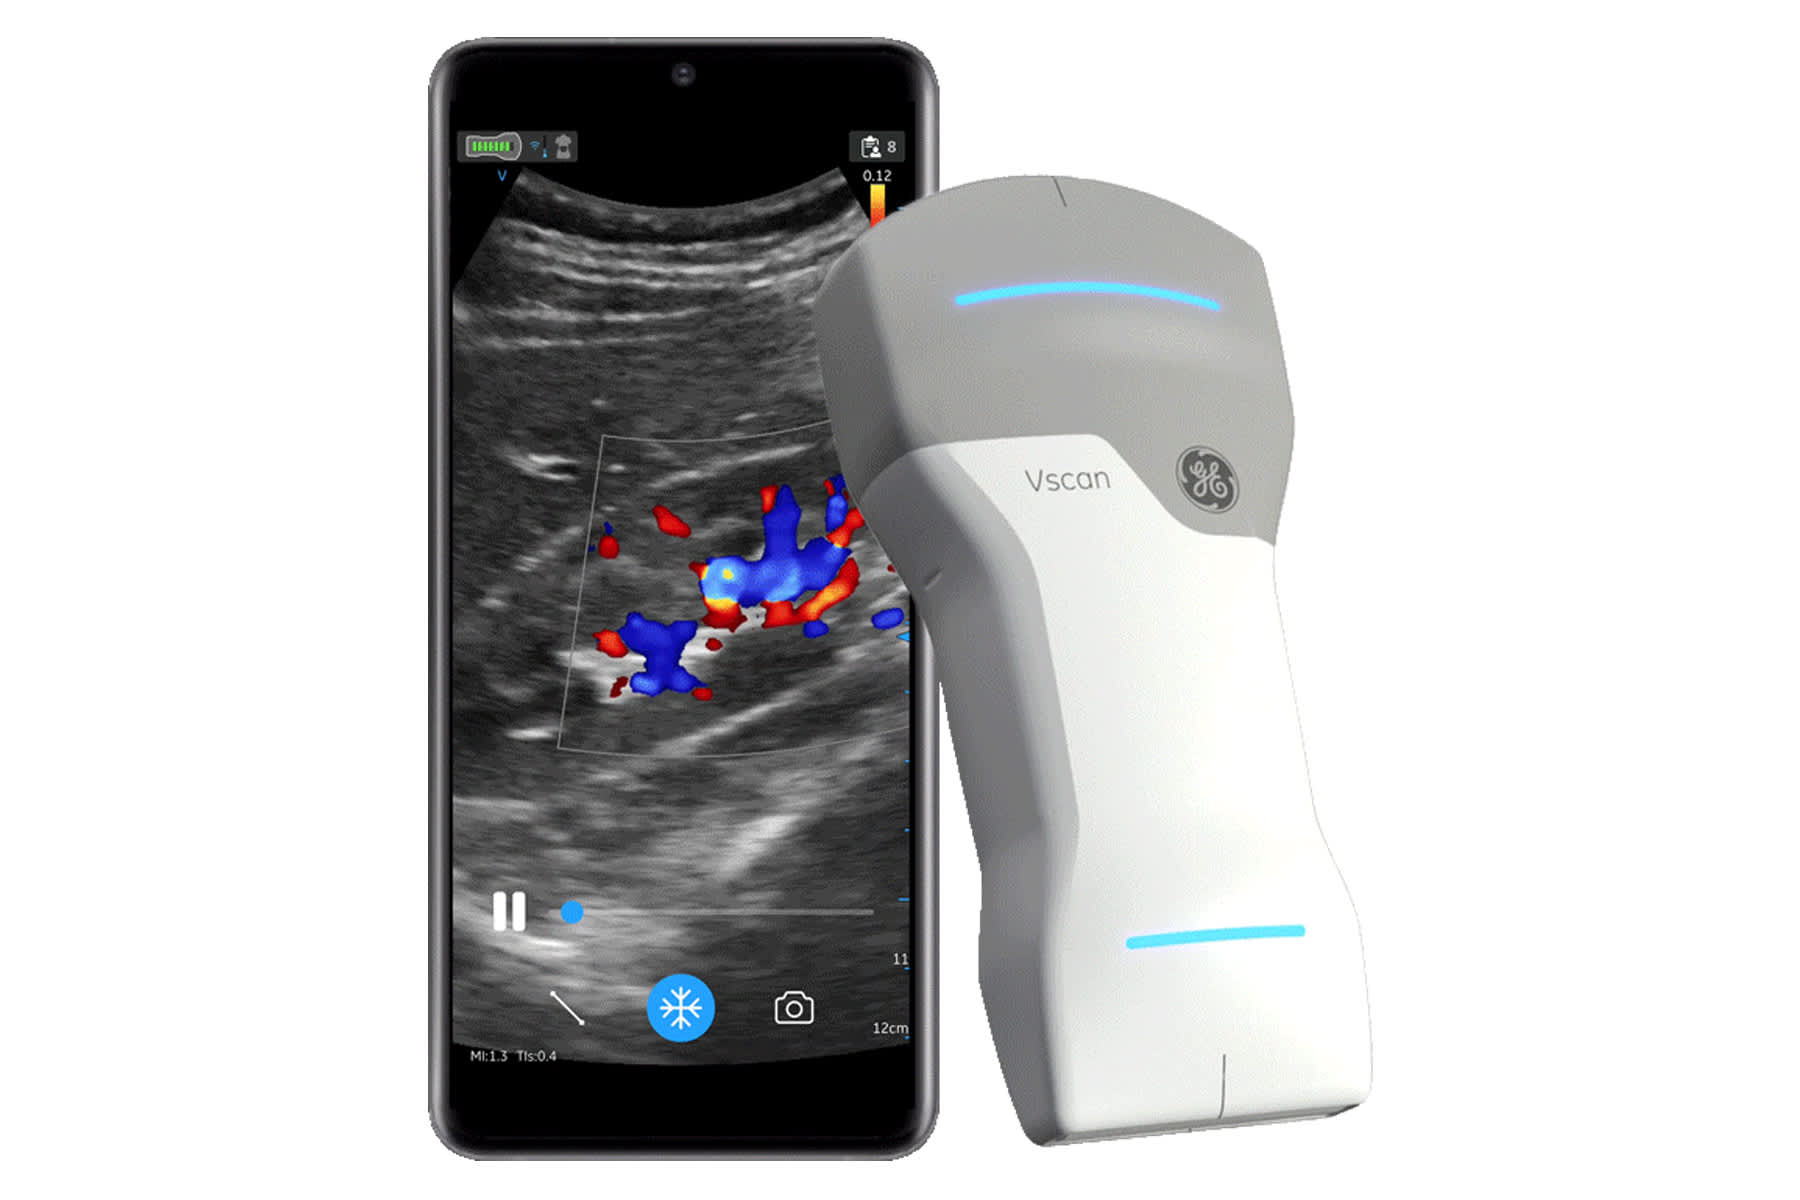 Portable Ultrasound Machines for Home or Clinic Use